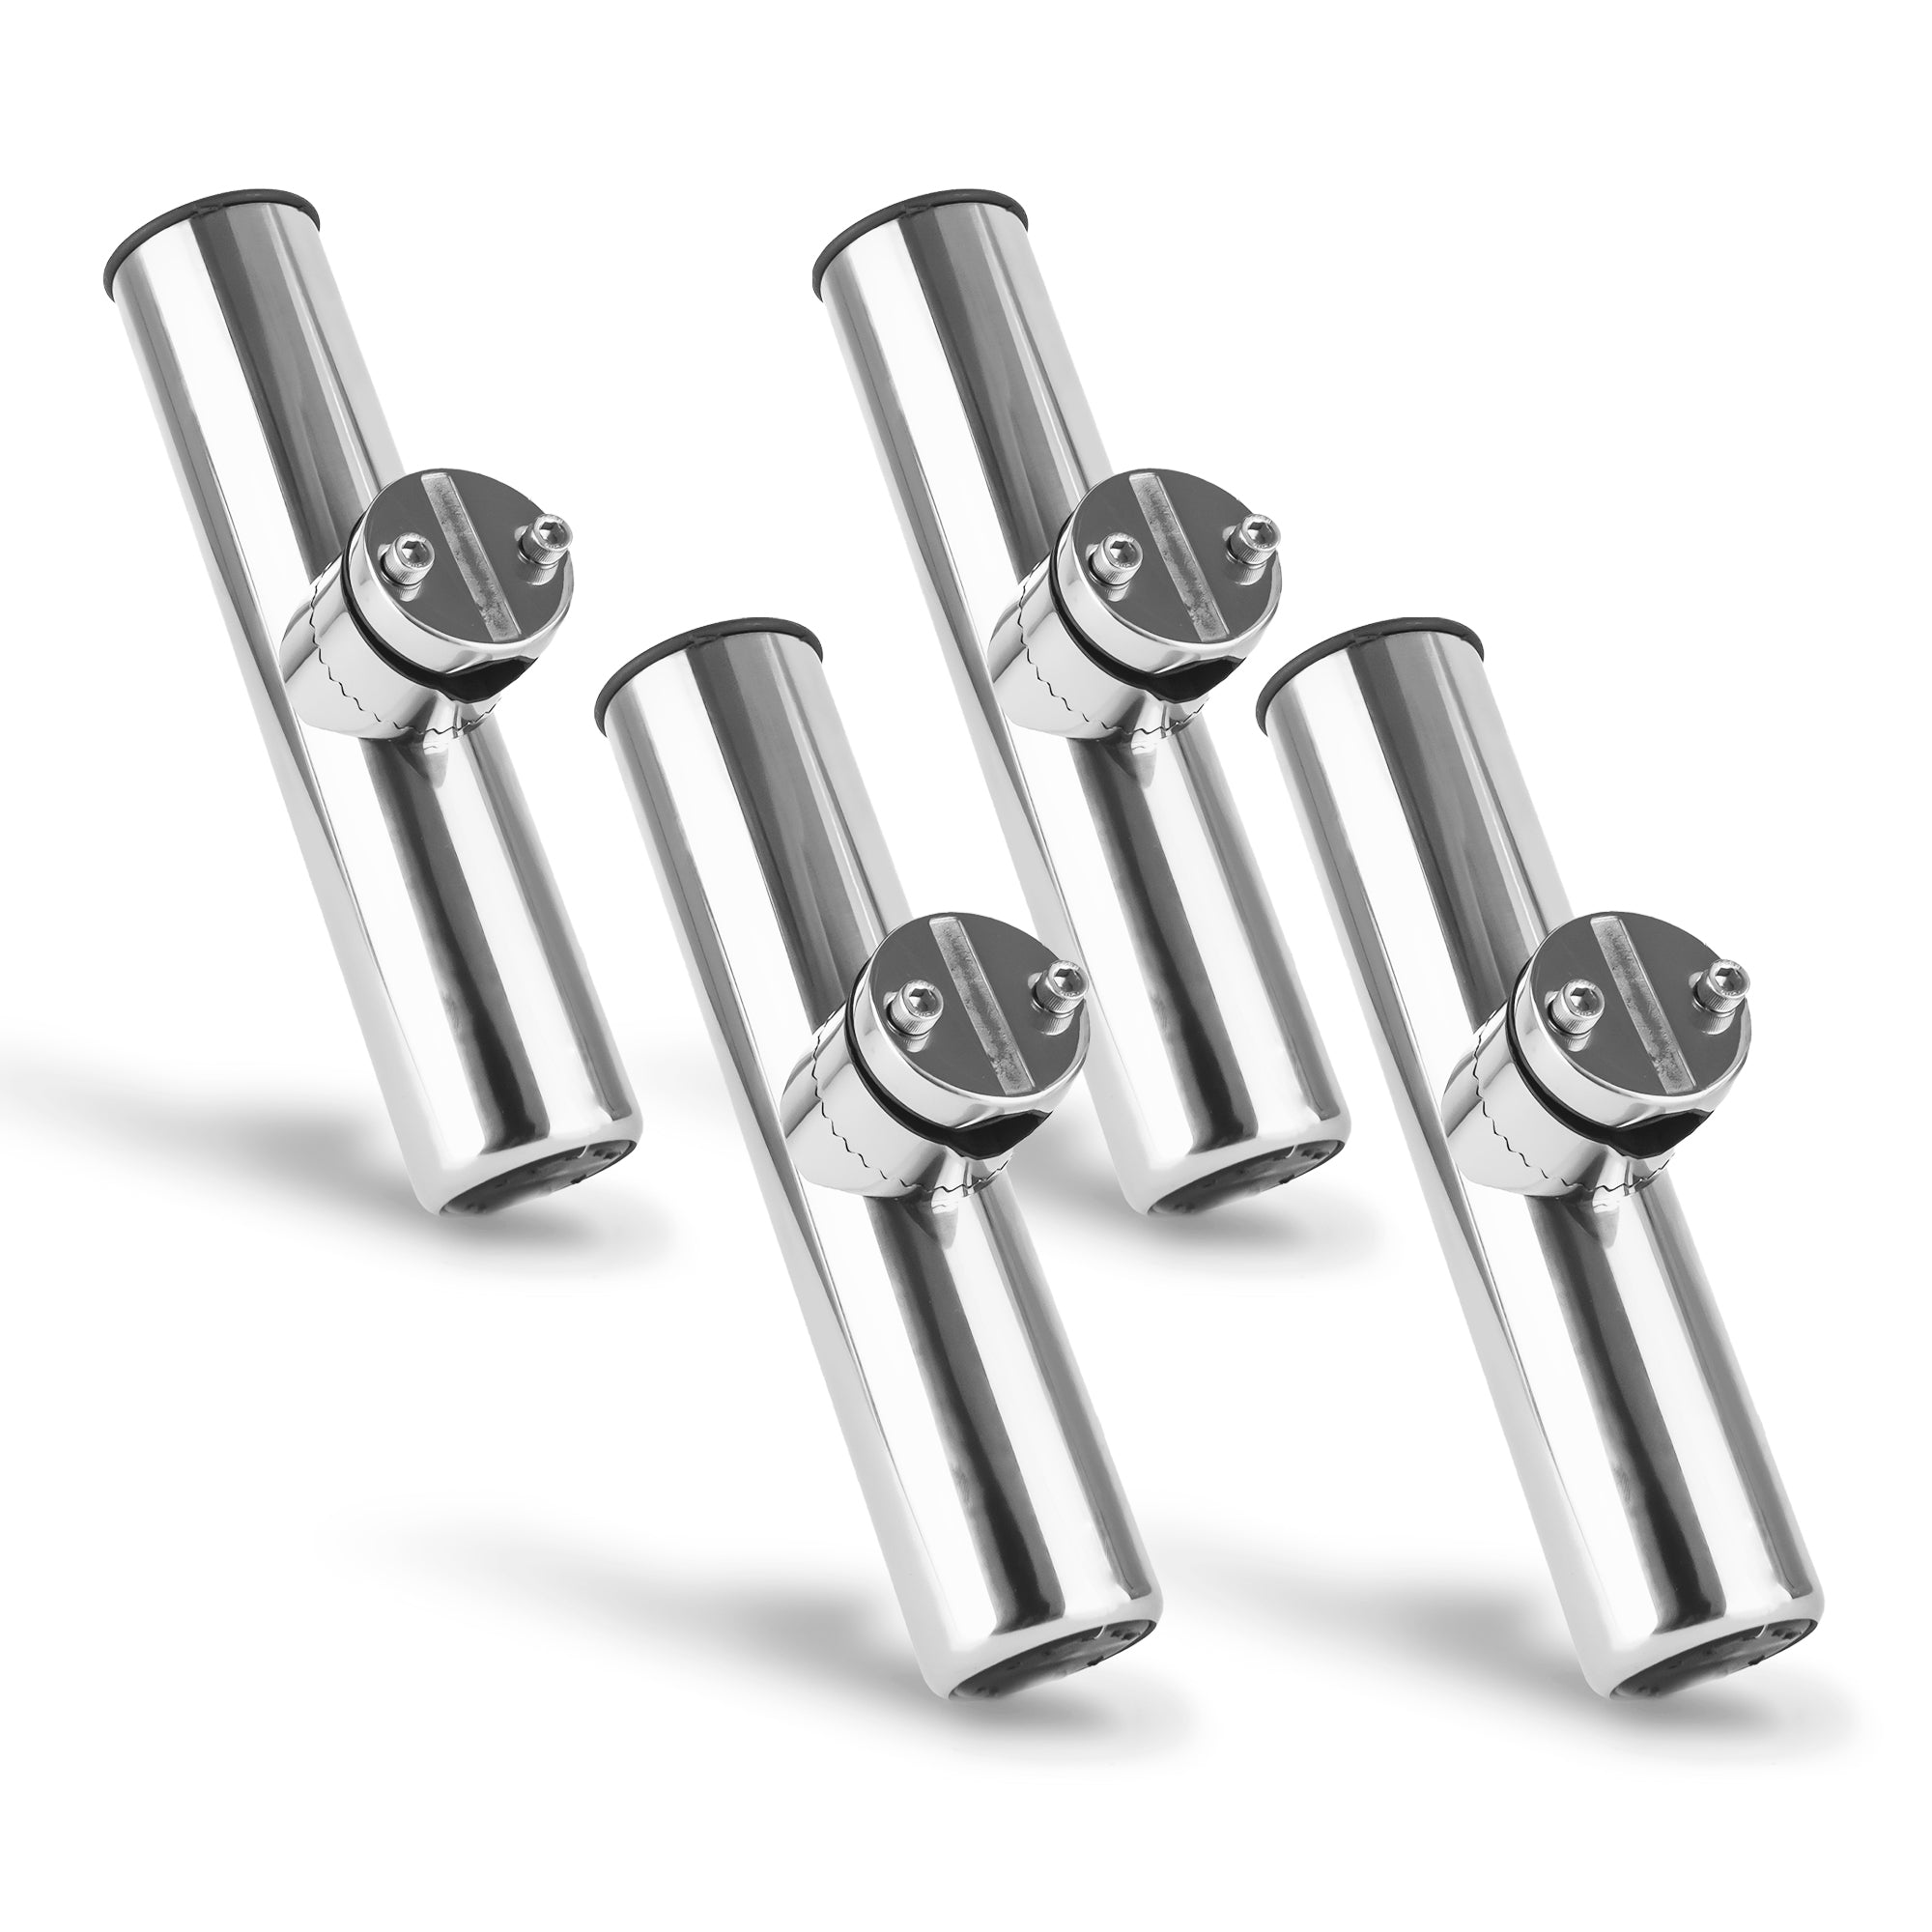 Clamp-on Fishing Rod Holder, Stainless Steel 4-Pack - FO4499-M4